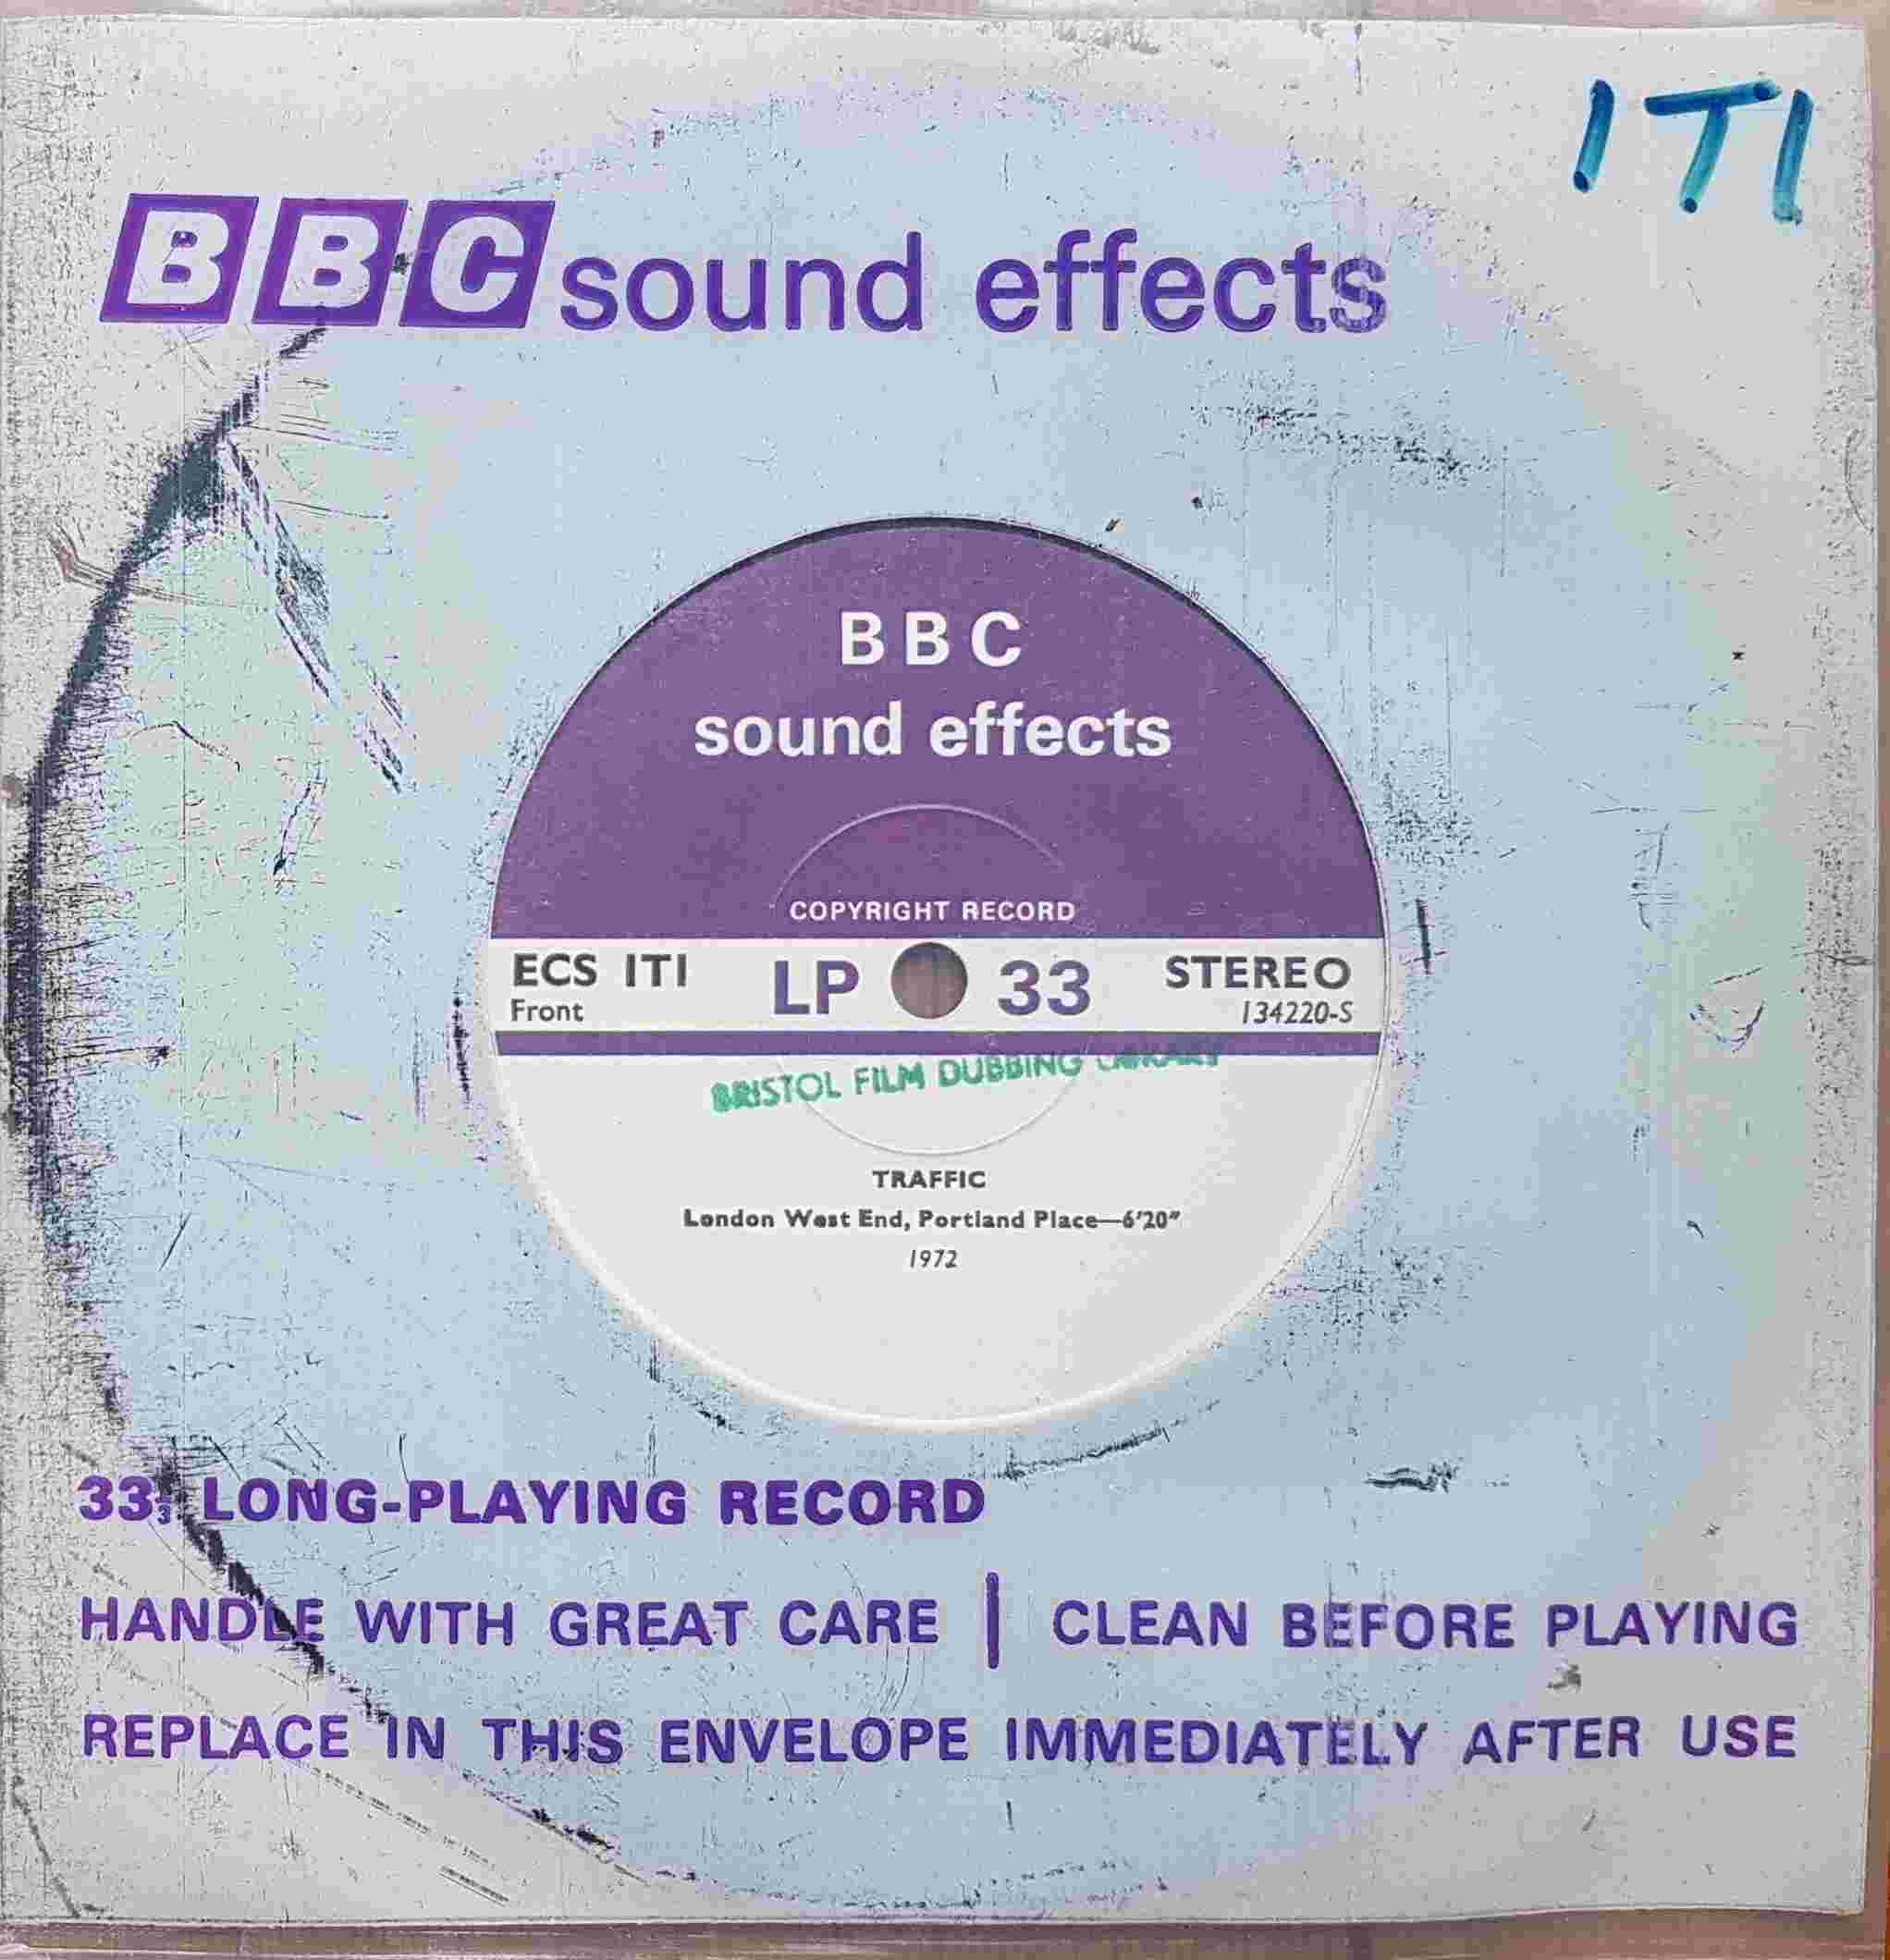 Picture of ECS 1T1 Traffic by artist Not registered from the BBC records and Tapes library